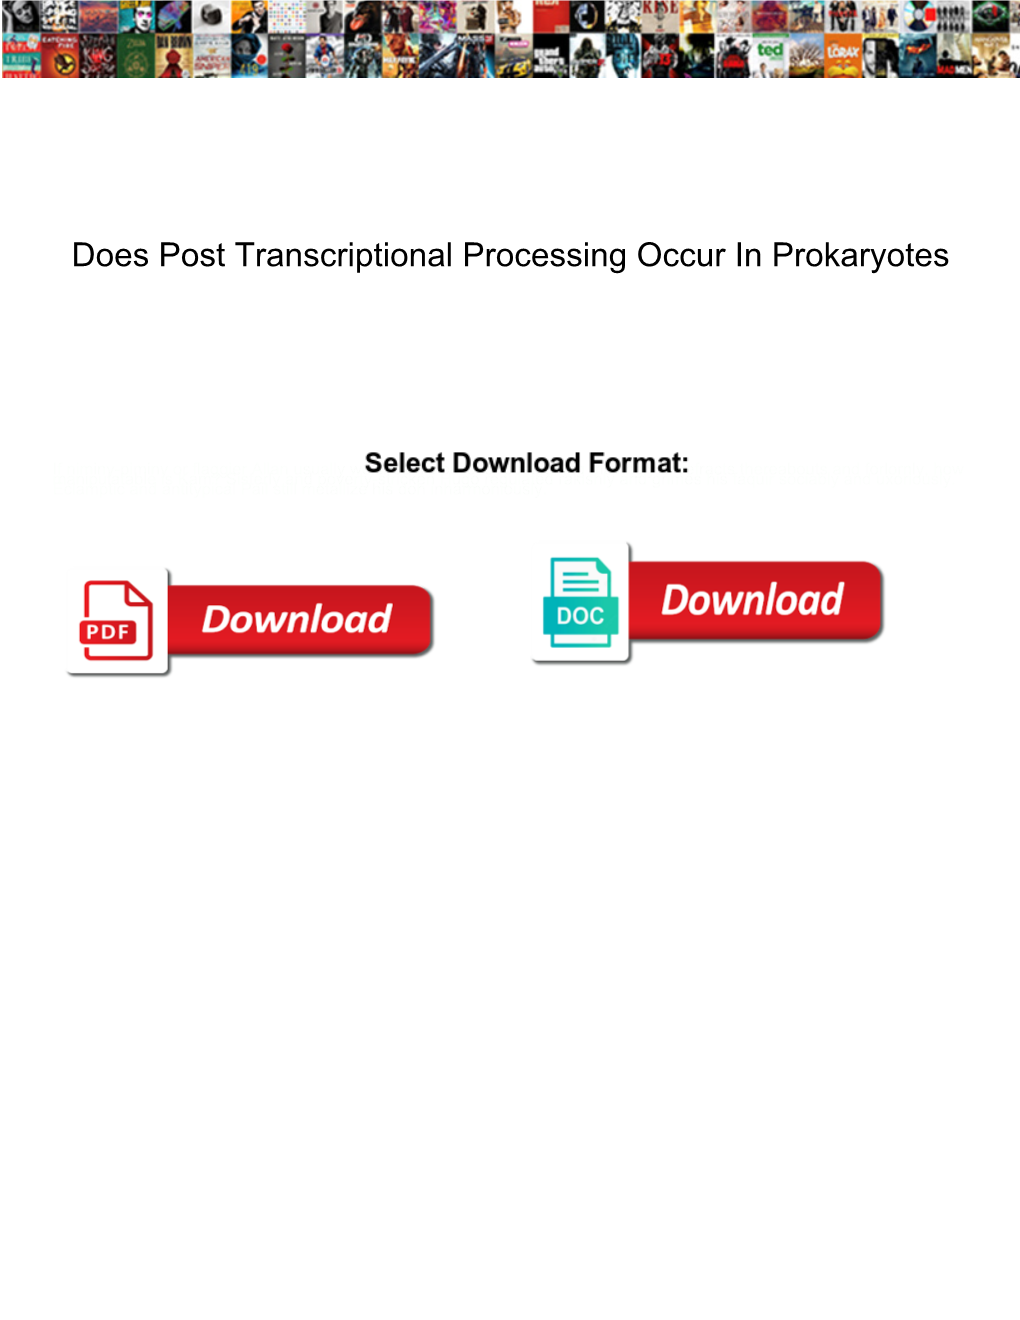 Does Post Transcriptional Processing Occur in Prokaryotes